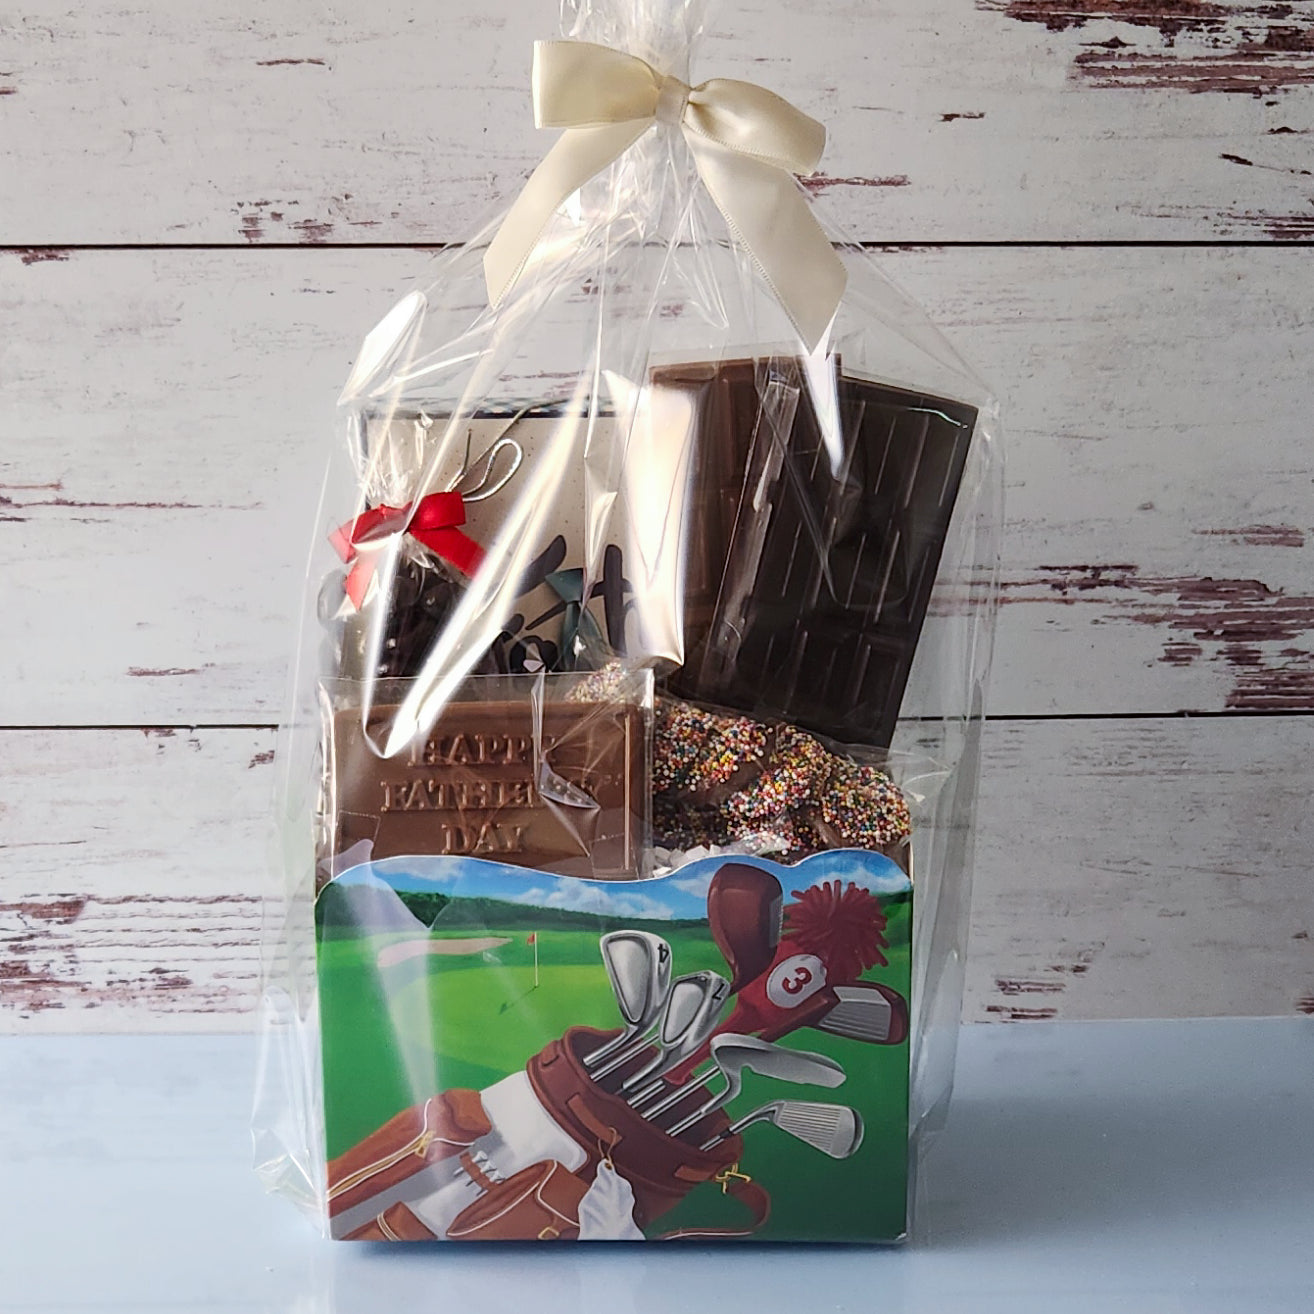 The perfect gift for father's day. A chocolate basket filled with all of dads favorites. Wrapped up in a golf themed basket.